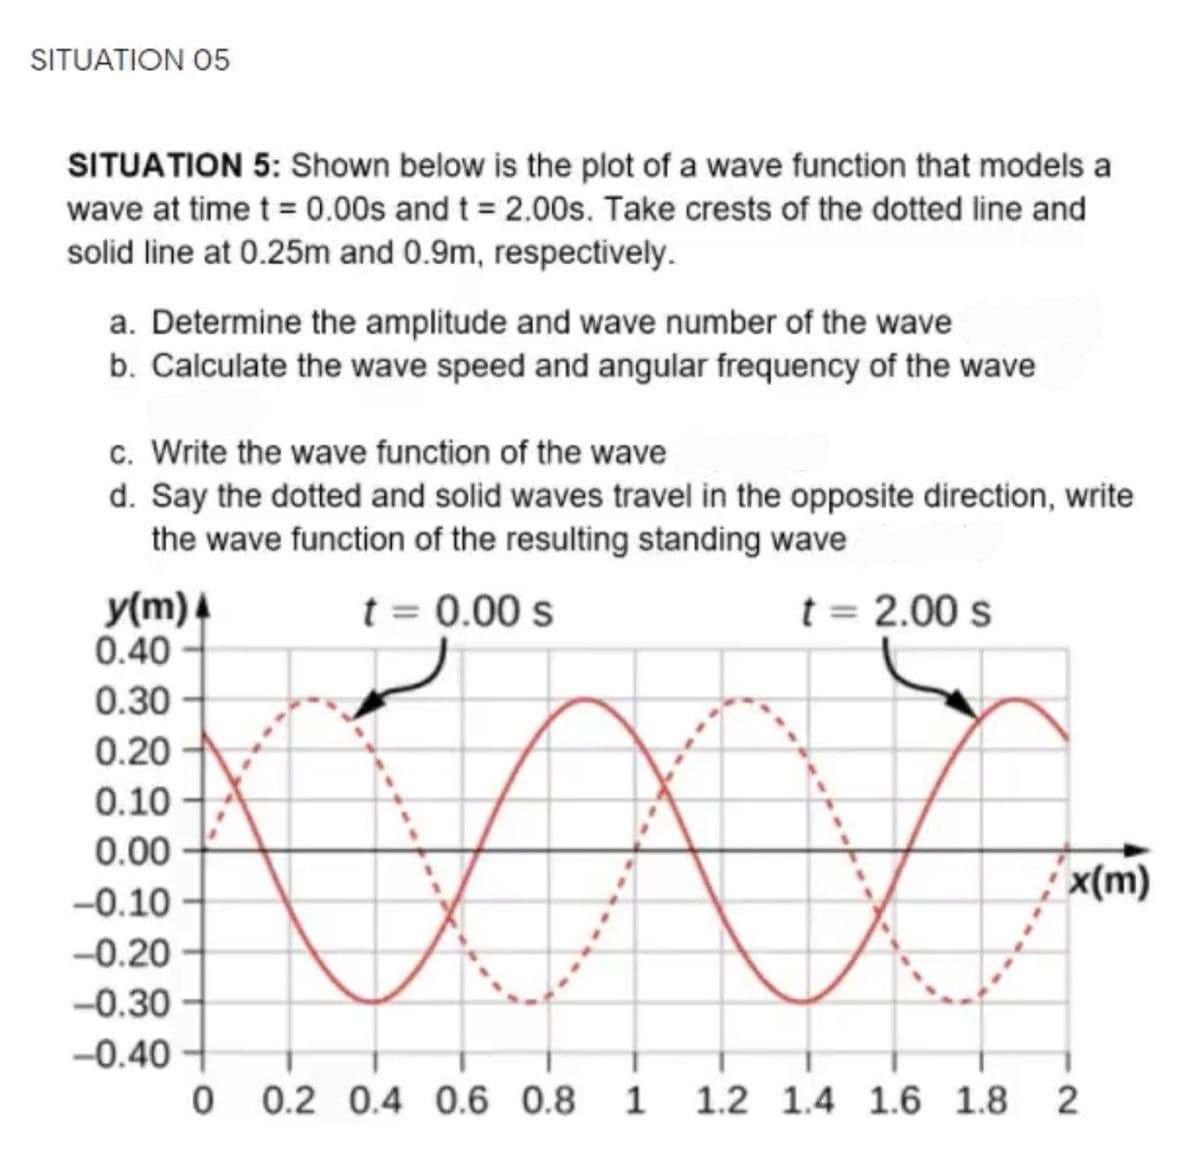 SITUATION 05
SITUATION 5: Shown below is the plot of a wave function that models a
wave at time t = 0.00s and t = 2.00s. Take crests of the dotted line and
solid line at 0.25m and 0.9m, respectively.
a. Determine the amplitude and wave number of the wave
b. Calculate the wave speed and angular frequency of the wave
c. Write the wave function of the wave
d. Say the dotted and solid waves travel in the opposite direction, write
the wave function of the resulting standing wave
y(m) 4
0.40
t = 2.00 s
t = 0.00 s
0.30
0.20
0.10
0.00
; x(m)
-0.10
-0.20
-0.30
-0.40
0.2 0.4 0.6 0.8
1
1.2 1.4 1.6 1.8
2.
